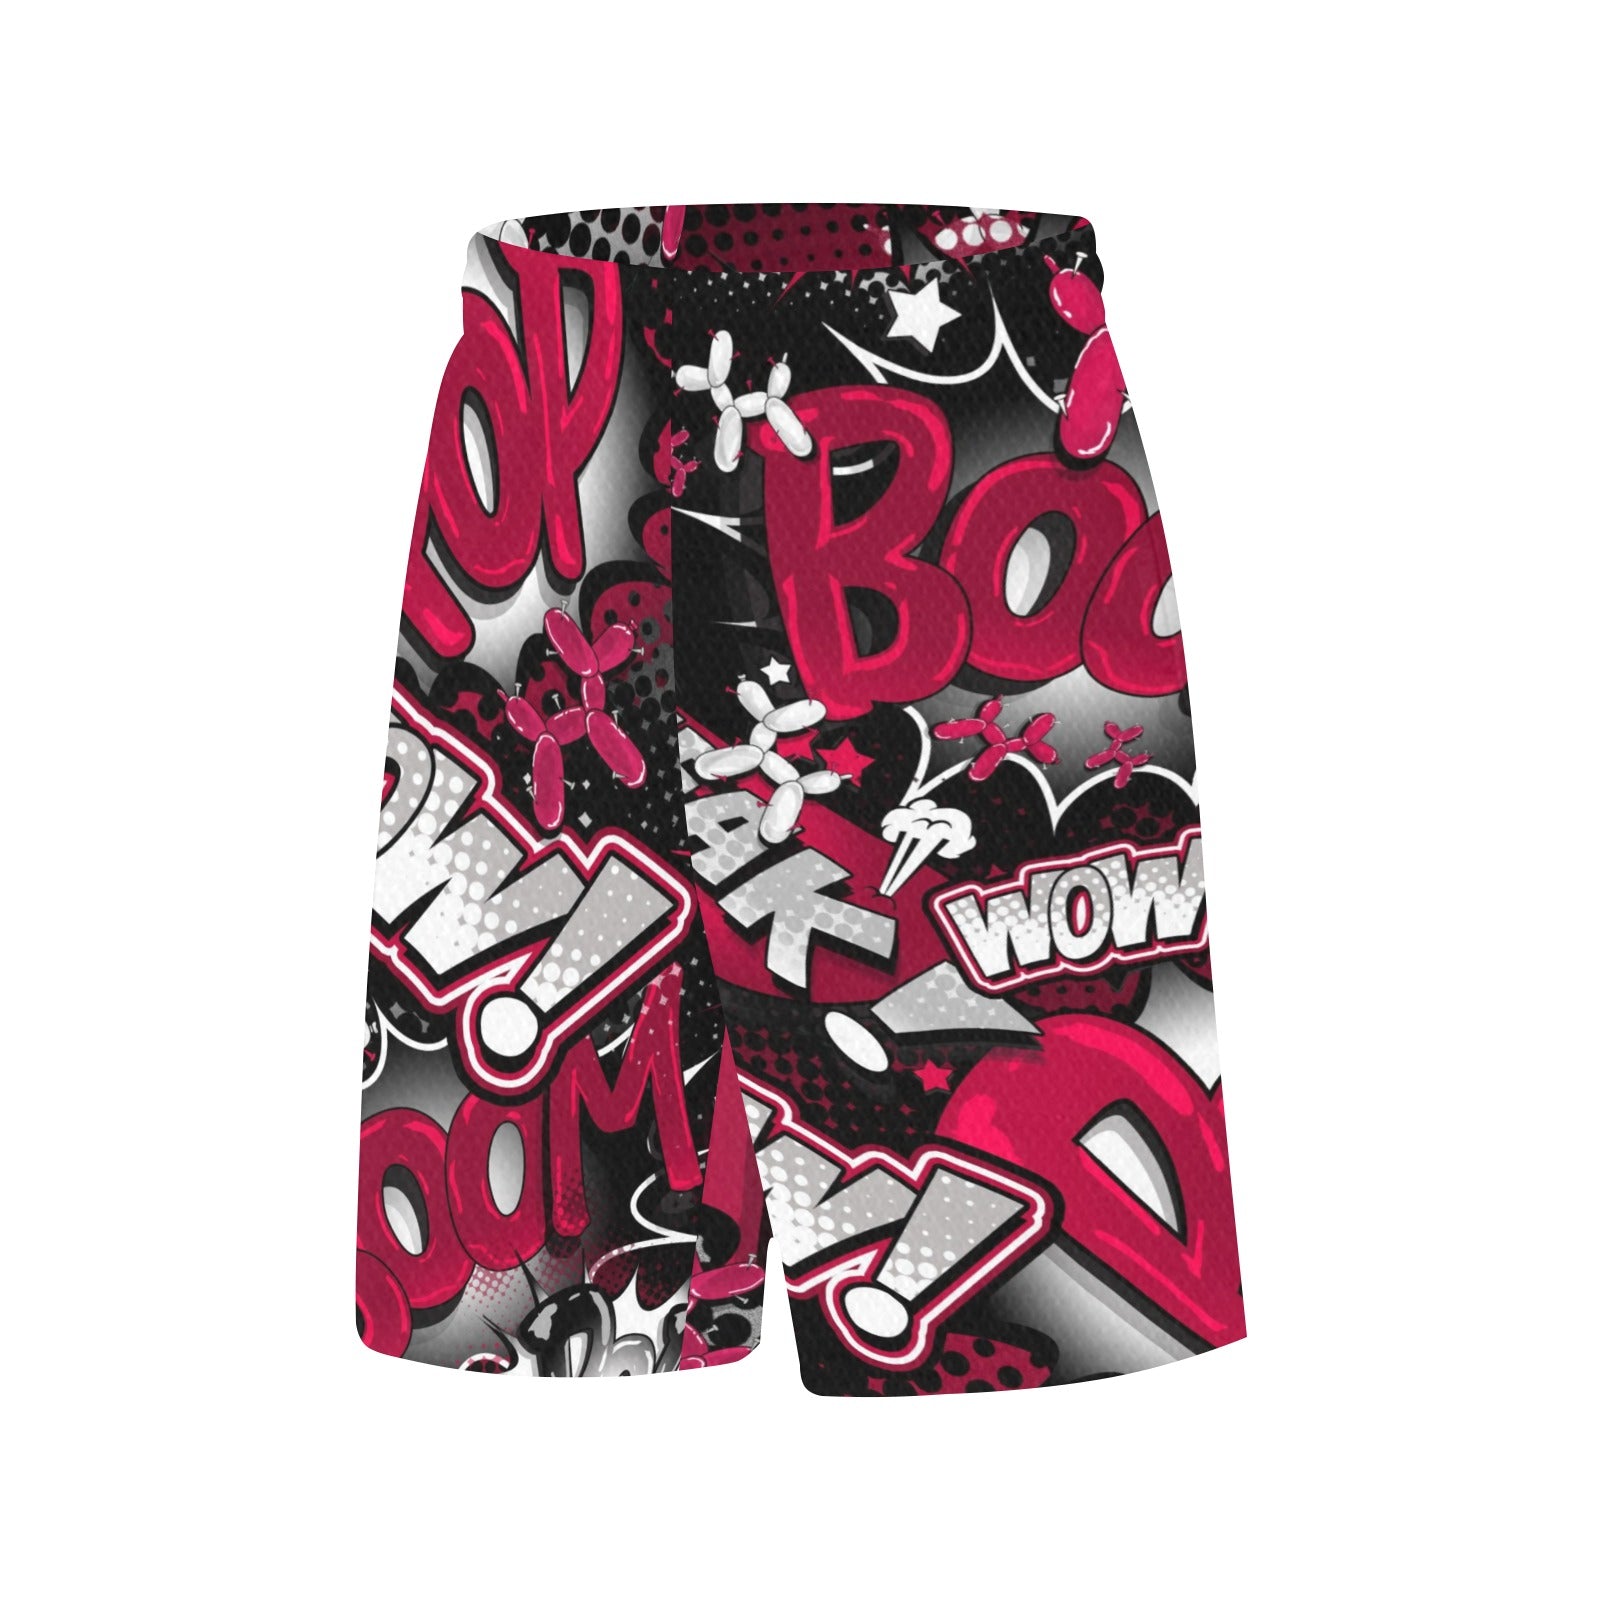 Balloon Dog Shorts for entertainers. Red and Black Pop art balloon dogs